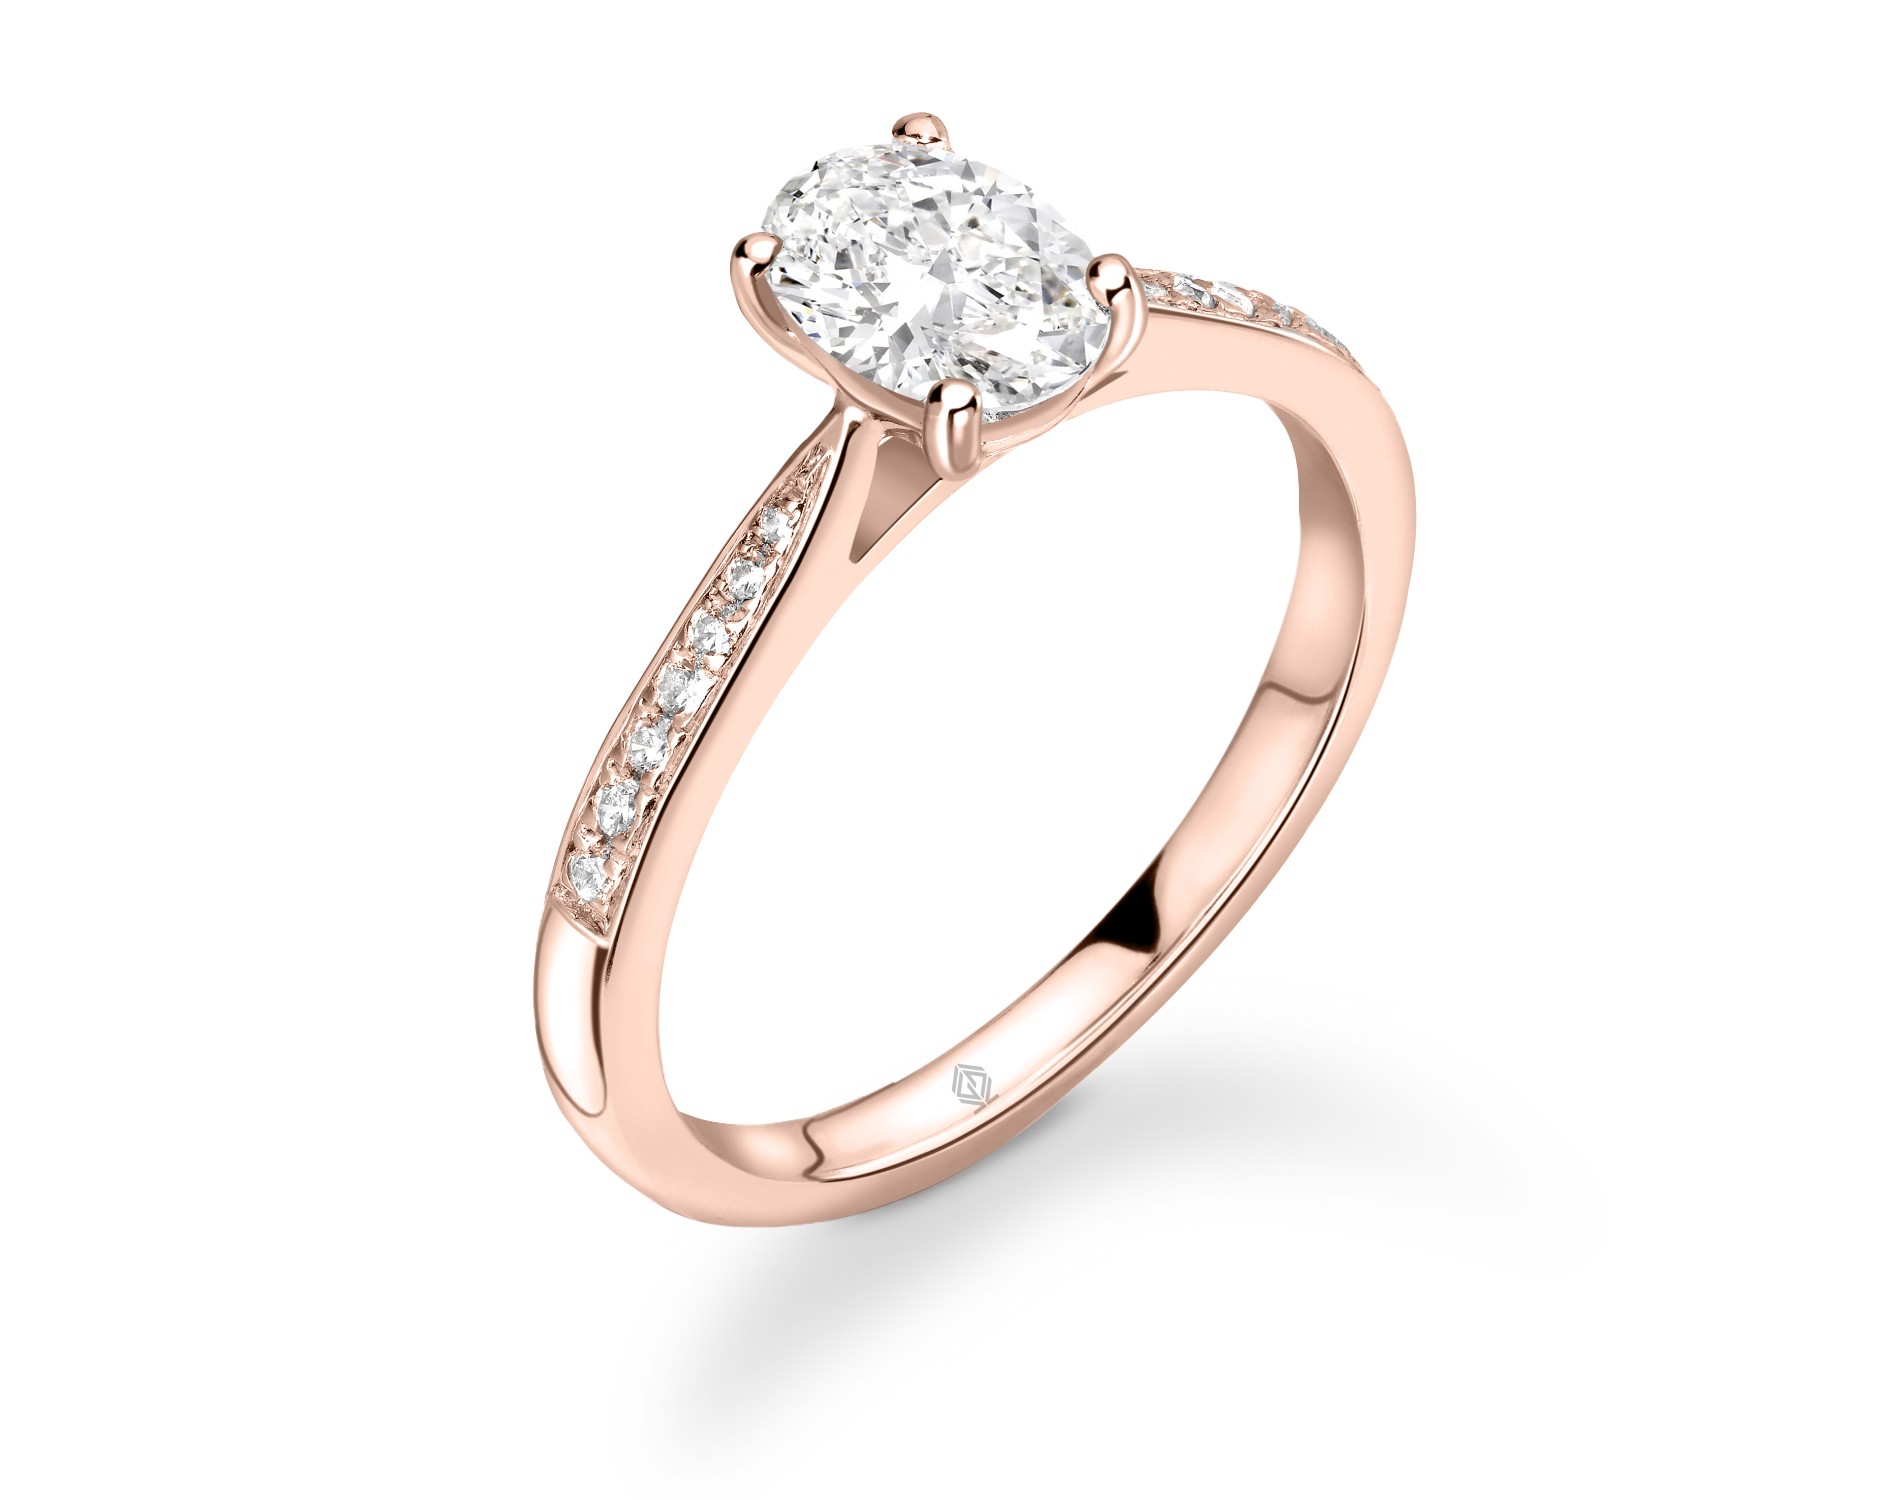 18K ROSE GOLD OVAL CUT DIAMOND ENGAGEMENT RING WITH SIDE STONES CHANNEL SET